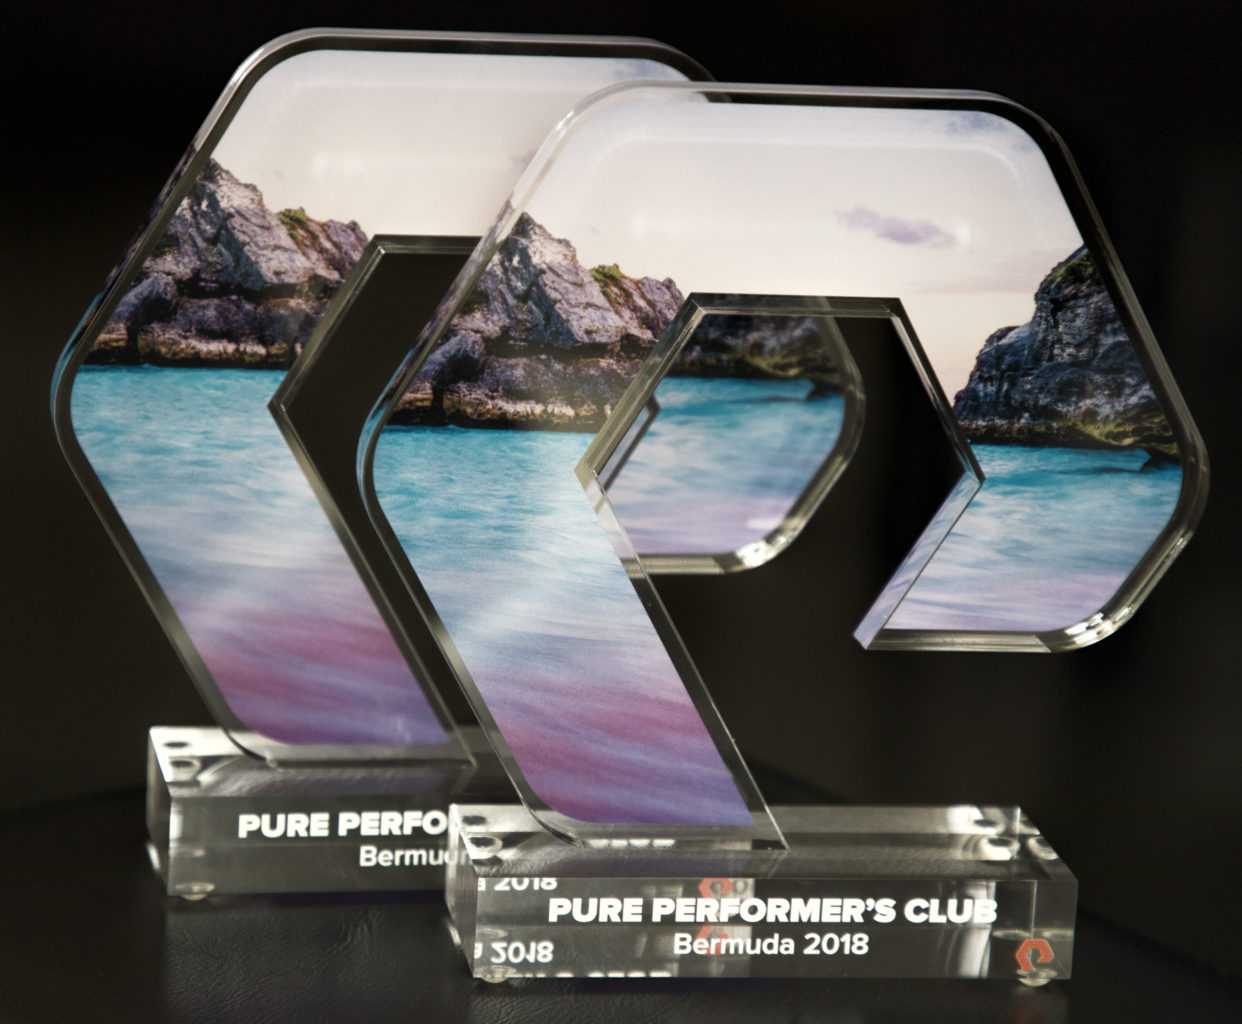 Packet Systems Indonesia confirmed to join an elite club of Pure Performance’s Club